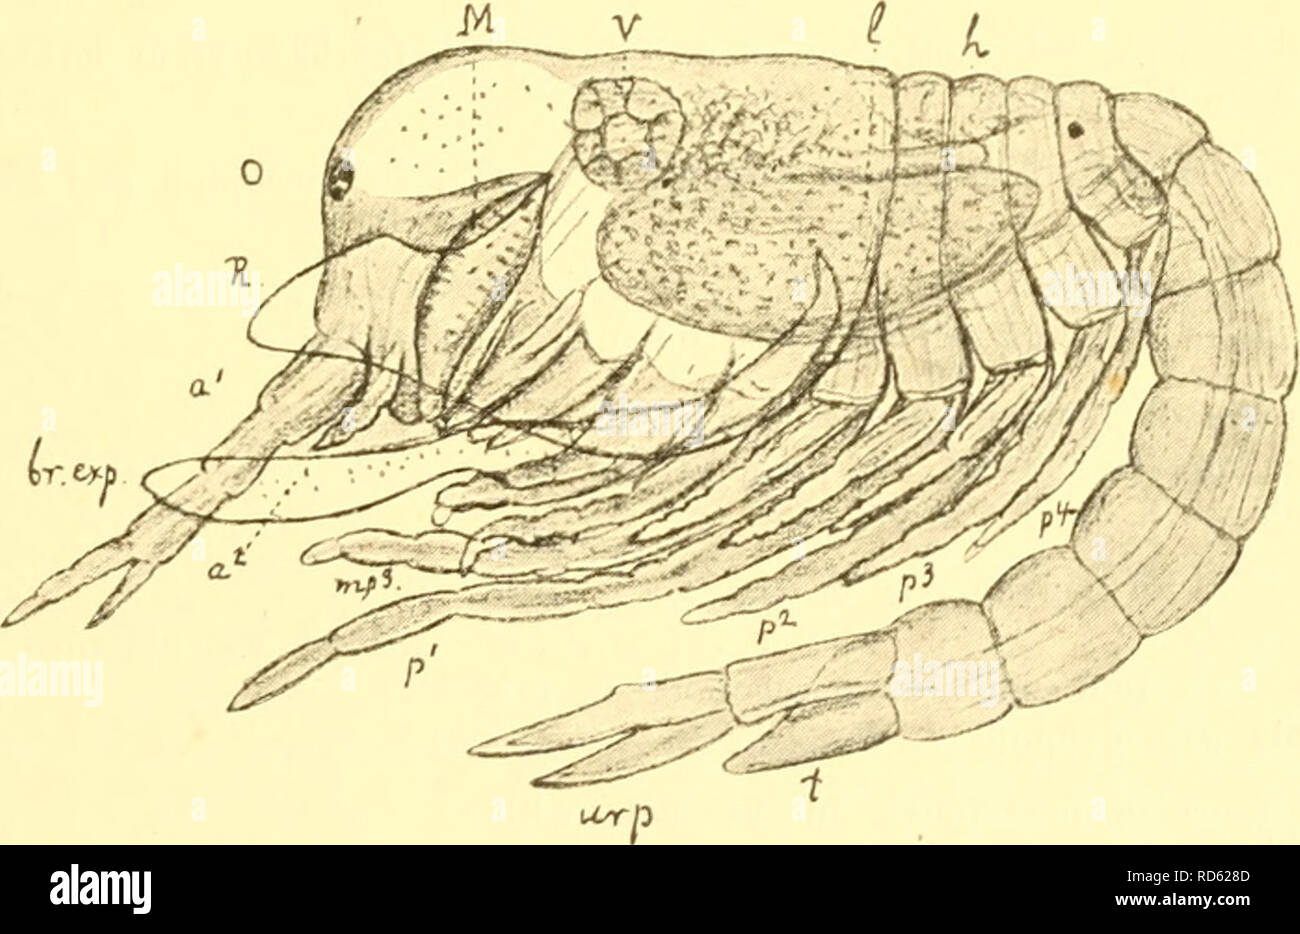 . Cumacea (Sympoda). Cumacea. Fig. 3. Larval stage of Diastylis lucifer (Kroyerj, after Sars.. Fig. i. Later larval stage of Diastylis lucifer (Kroyer), after Sars. Fig. 3 and 4. a' antenna 1, a' antenna 2, hr.exp. exopodal part of the Vjranchial apparatus, h heart, t intestinum, L anterior lip, I posterior lip, I liver sacs, U mandibles, »i' anterior maxilla, m^ posterior maxilla, mp^—mp'' maxilliped 1—3, 0 eye, p'-&quot; peraeopod 1—4, R rostral plates of carapace, t telson, urp uropod, v remnant of the yolk-mass. which in the female send a fan of filaments into the incubatory cavity. Third  Stock Photo